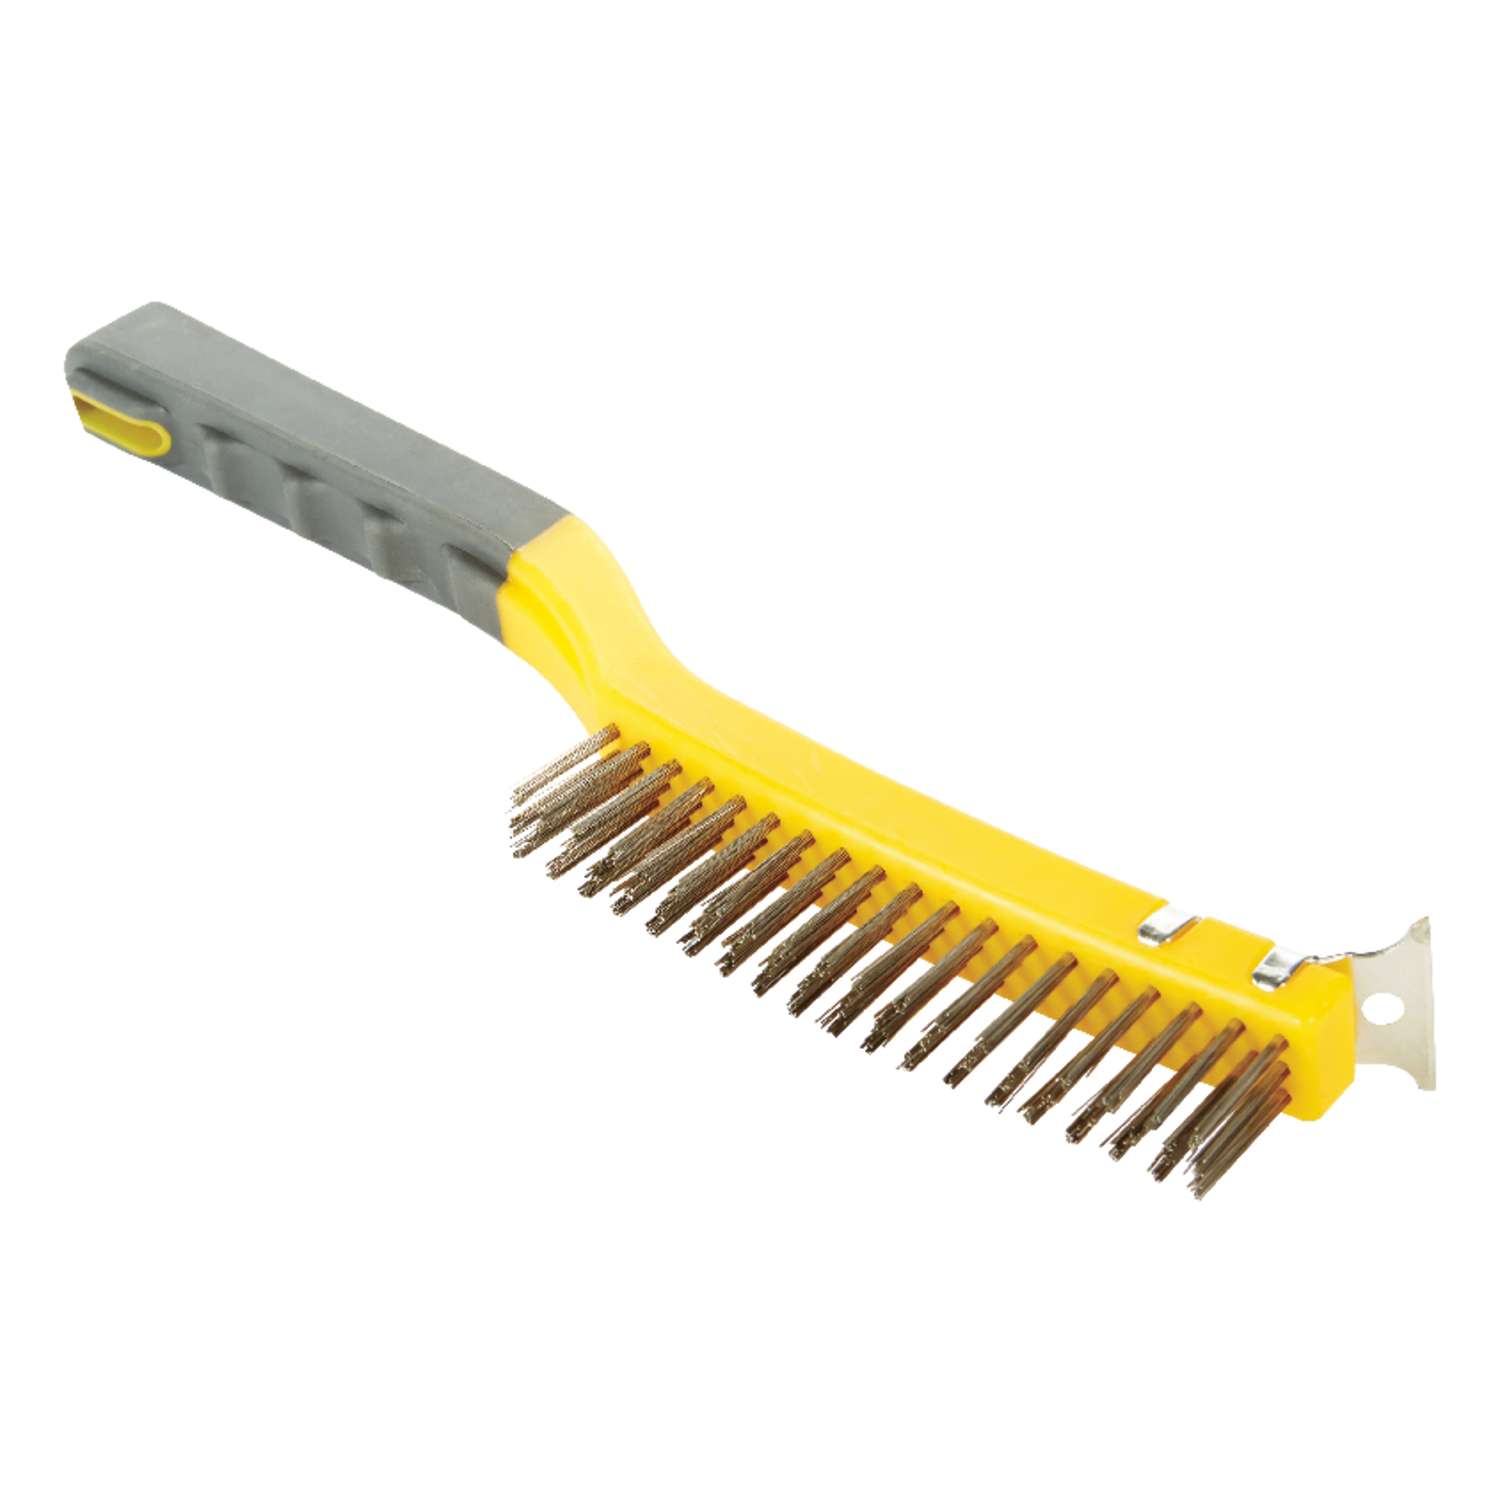 Texas Brush 7 5/8 x 2 5/8 Stainless Steel Wire Grill Brush Head for Smart  Grill Brushes